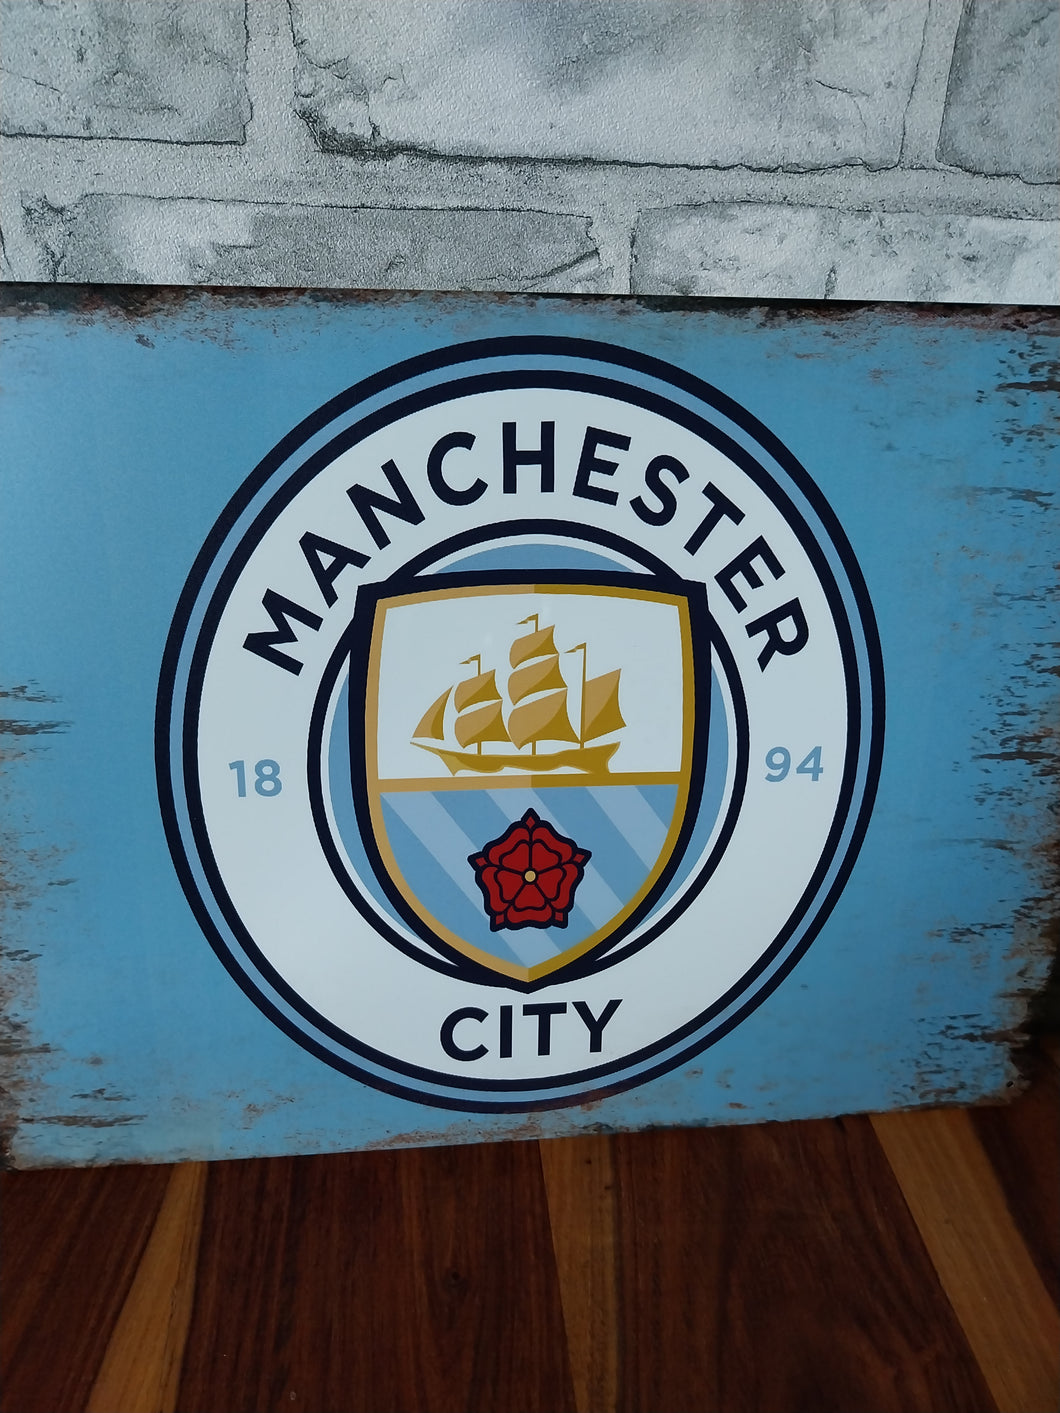 Manchester city vintage style metal sign